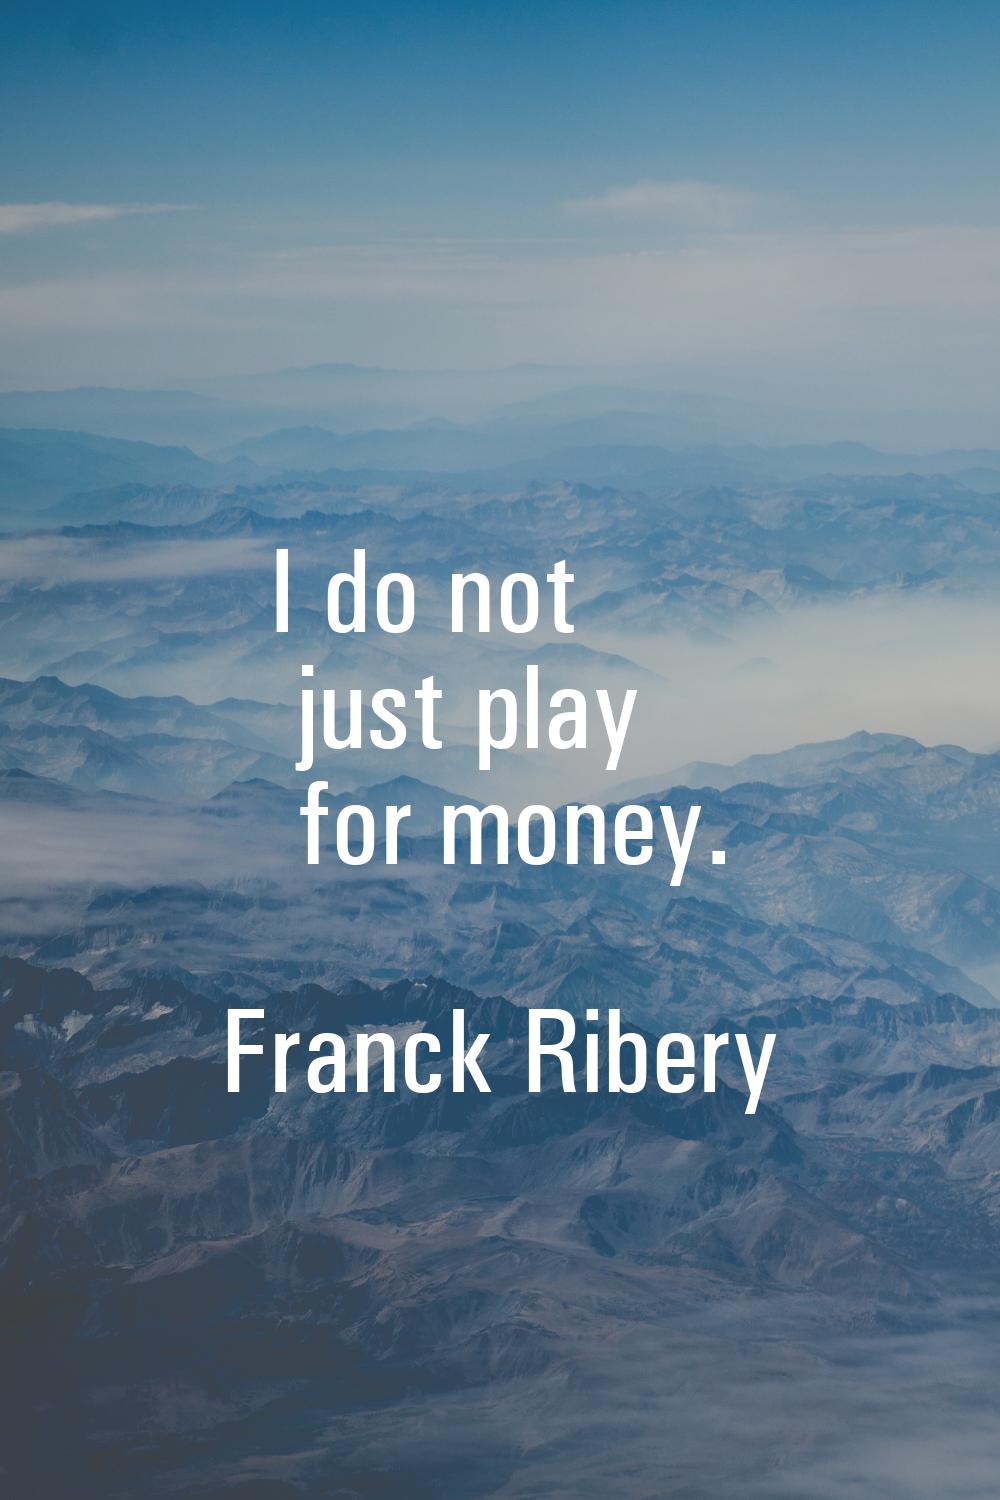 I do not just play for money.